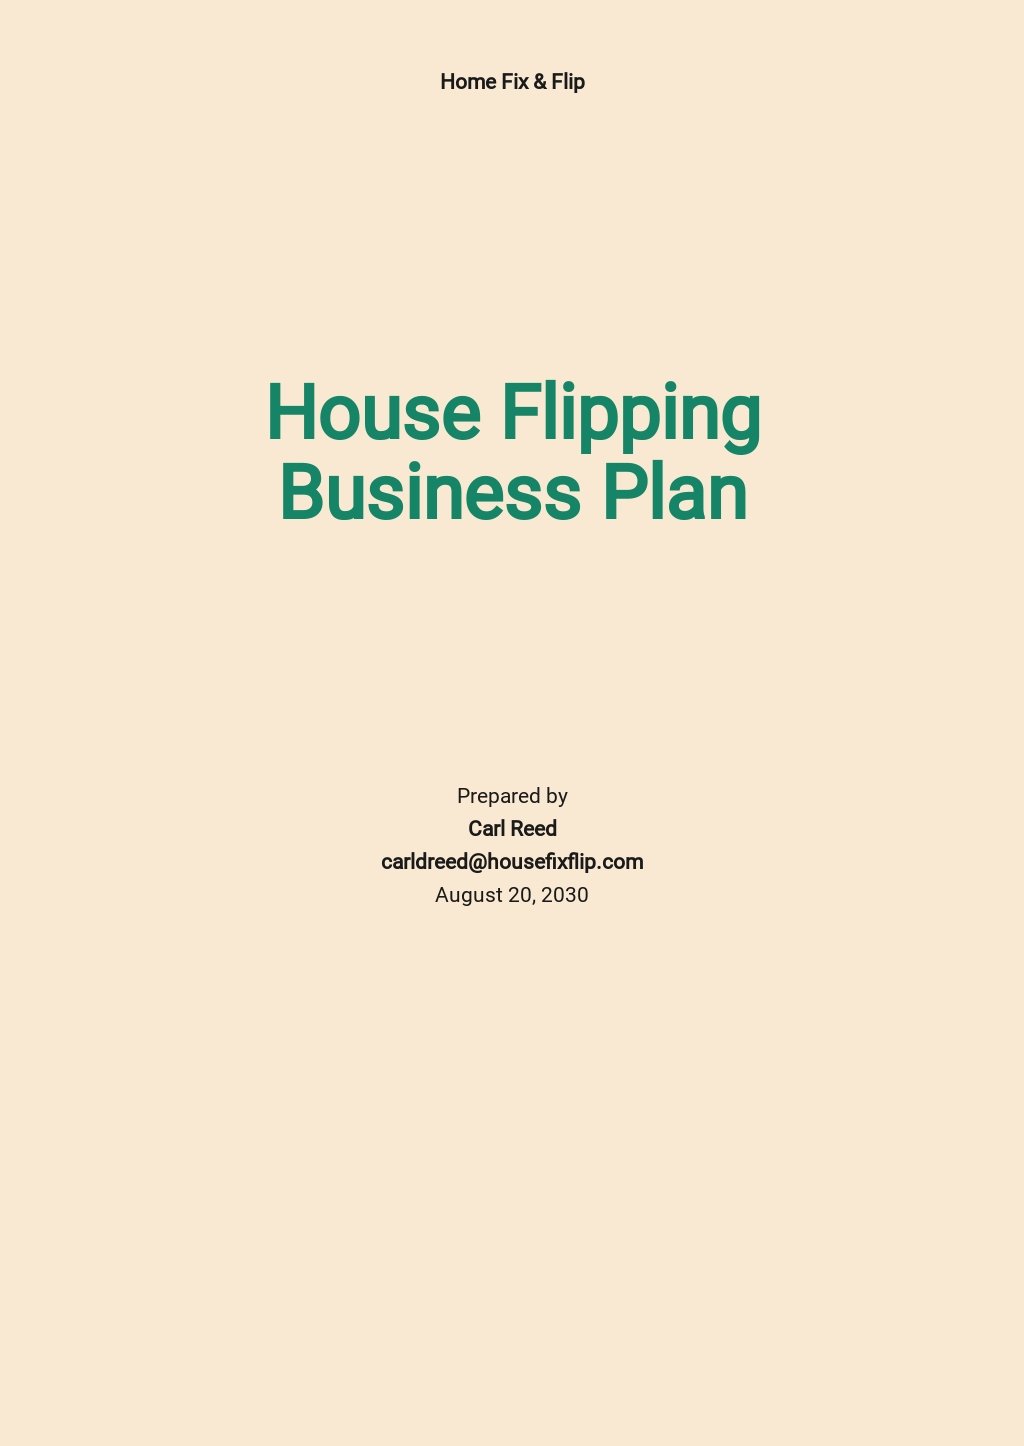 business plan to flip houses